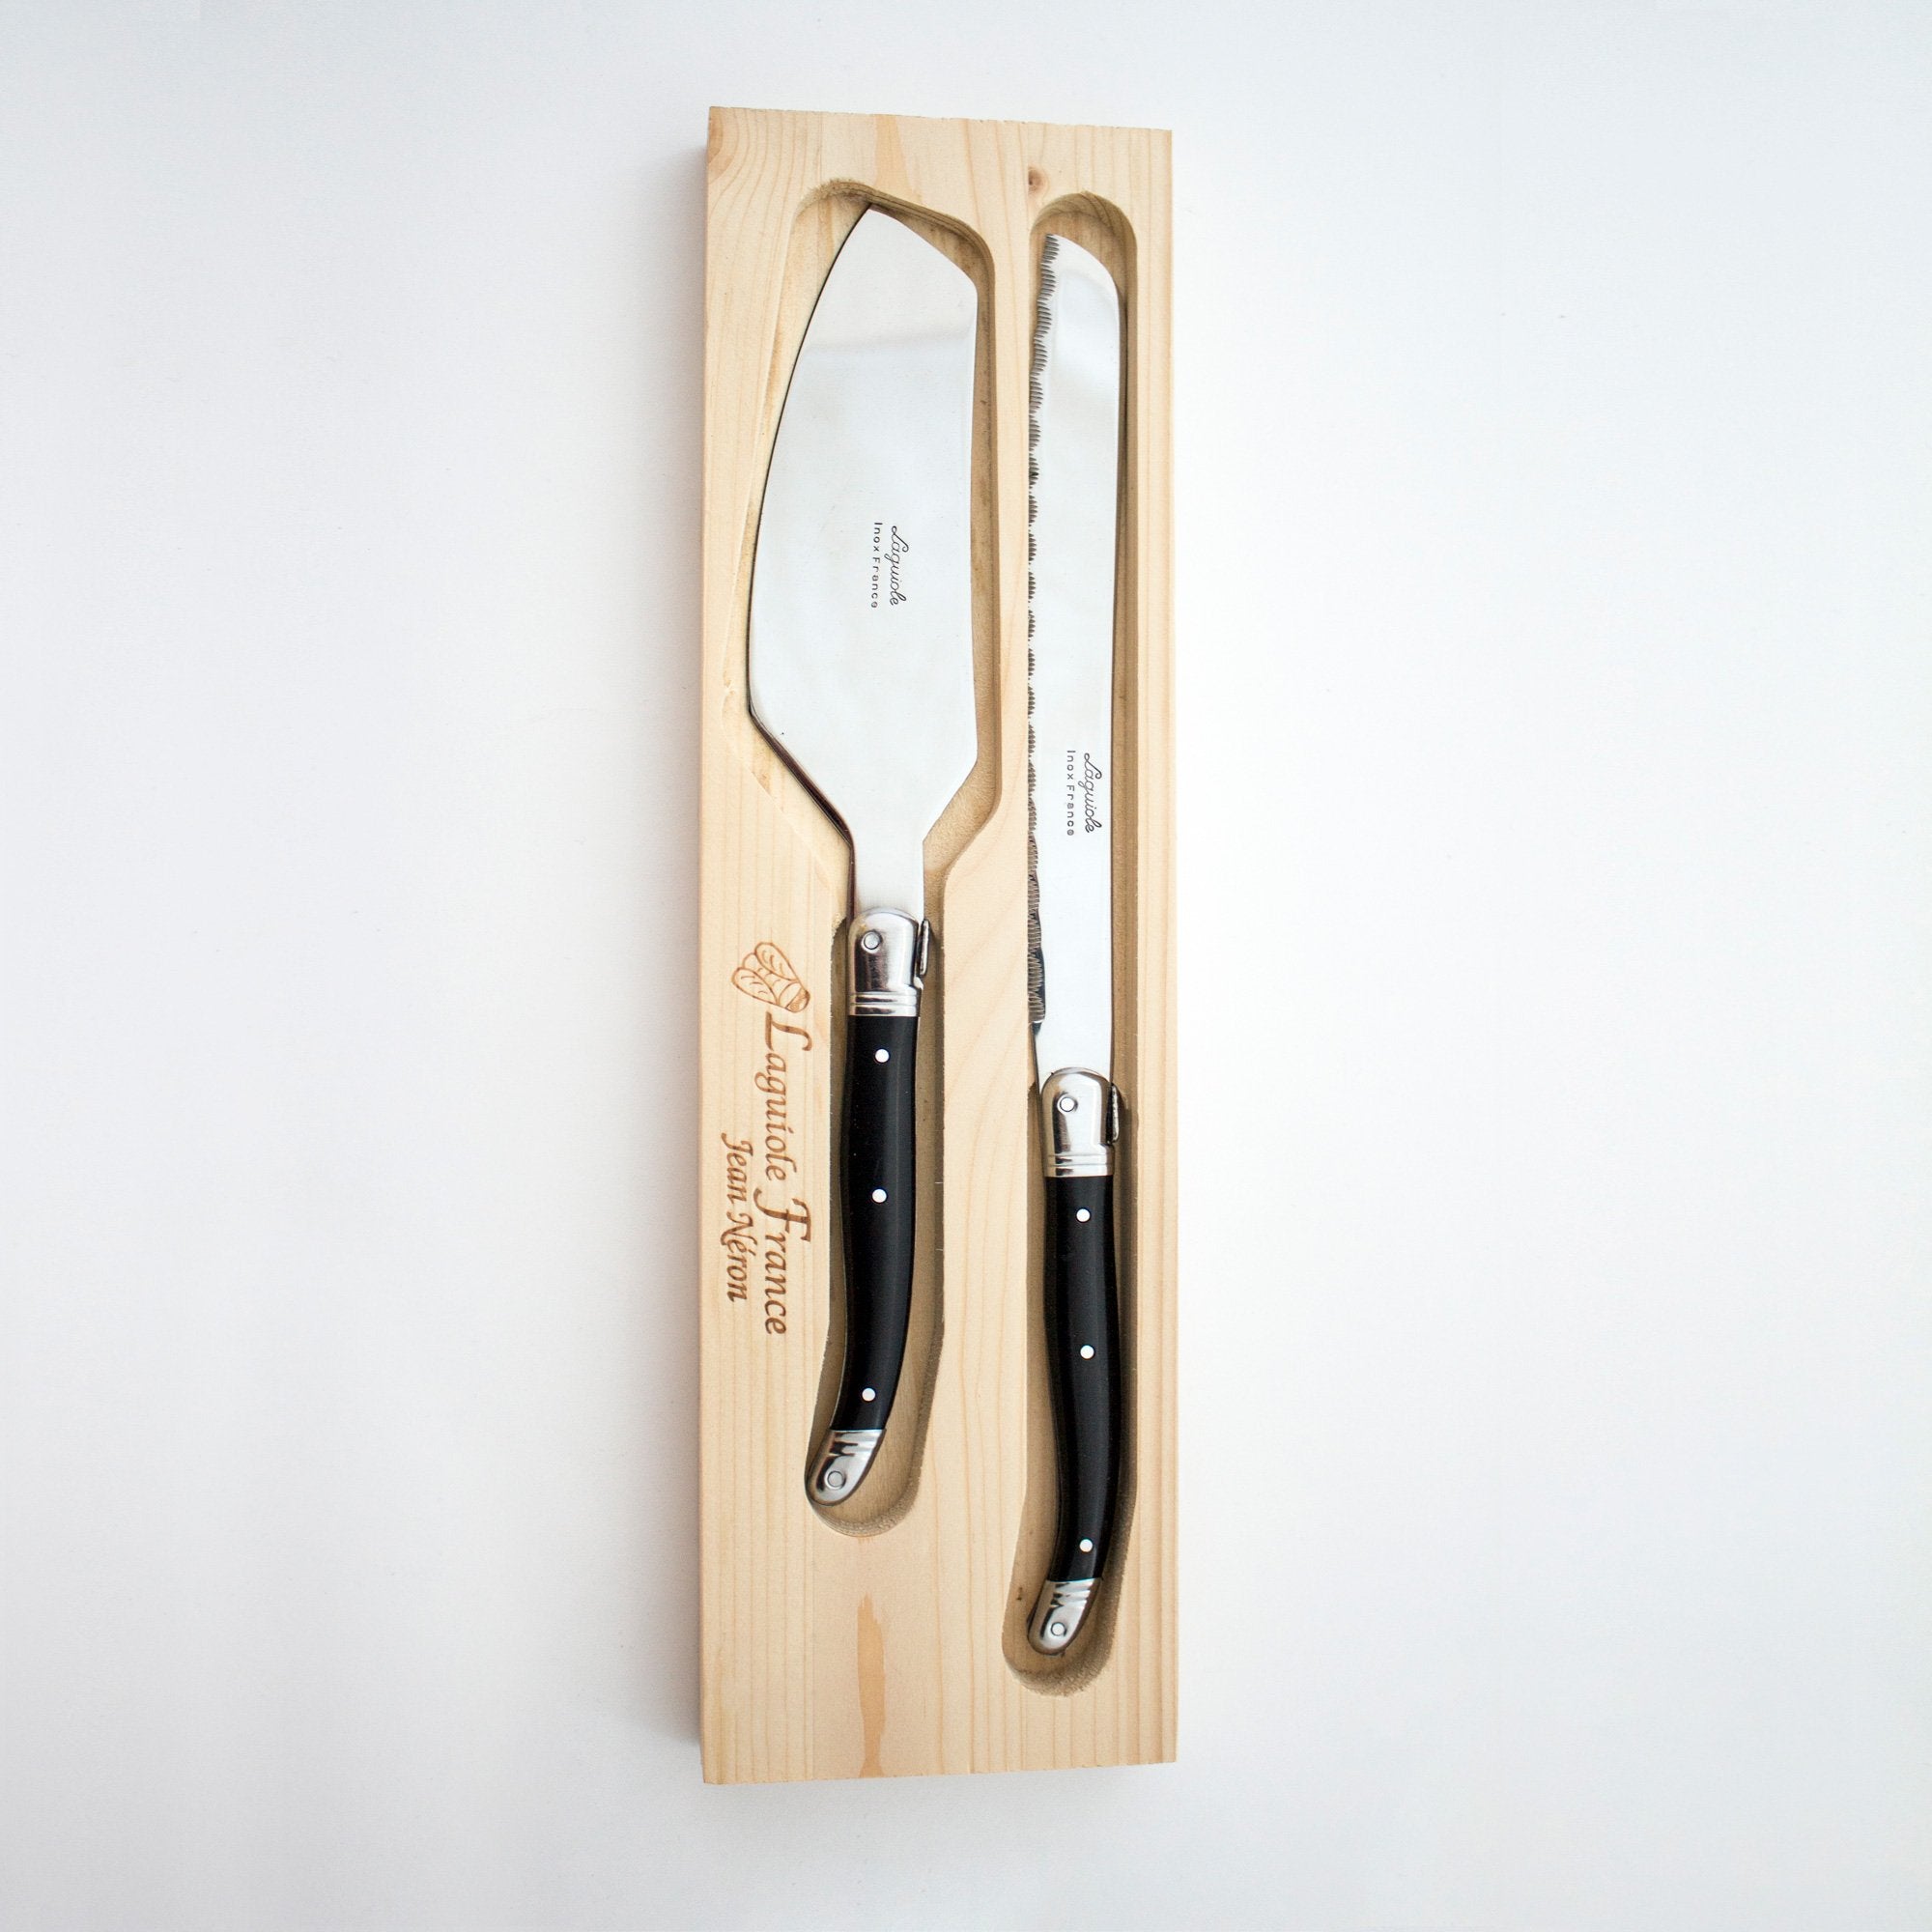 Laguiole French Black Cake Set in Wood Box (Cake Slicer and Bread Knife) - French Dry Goods